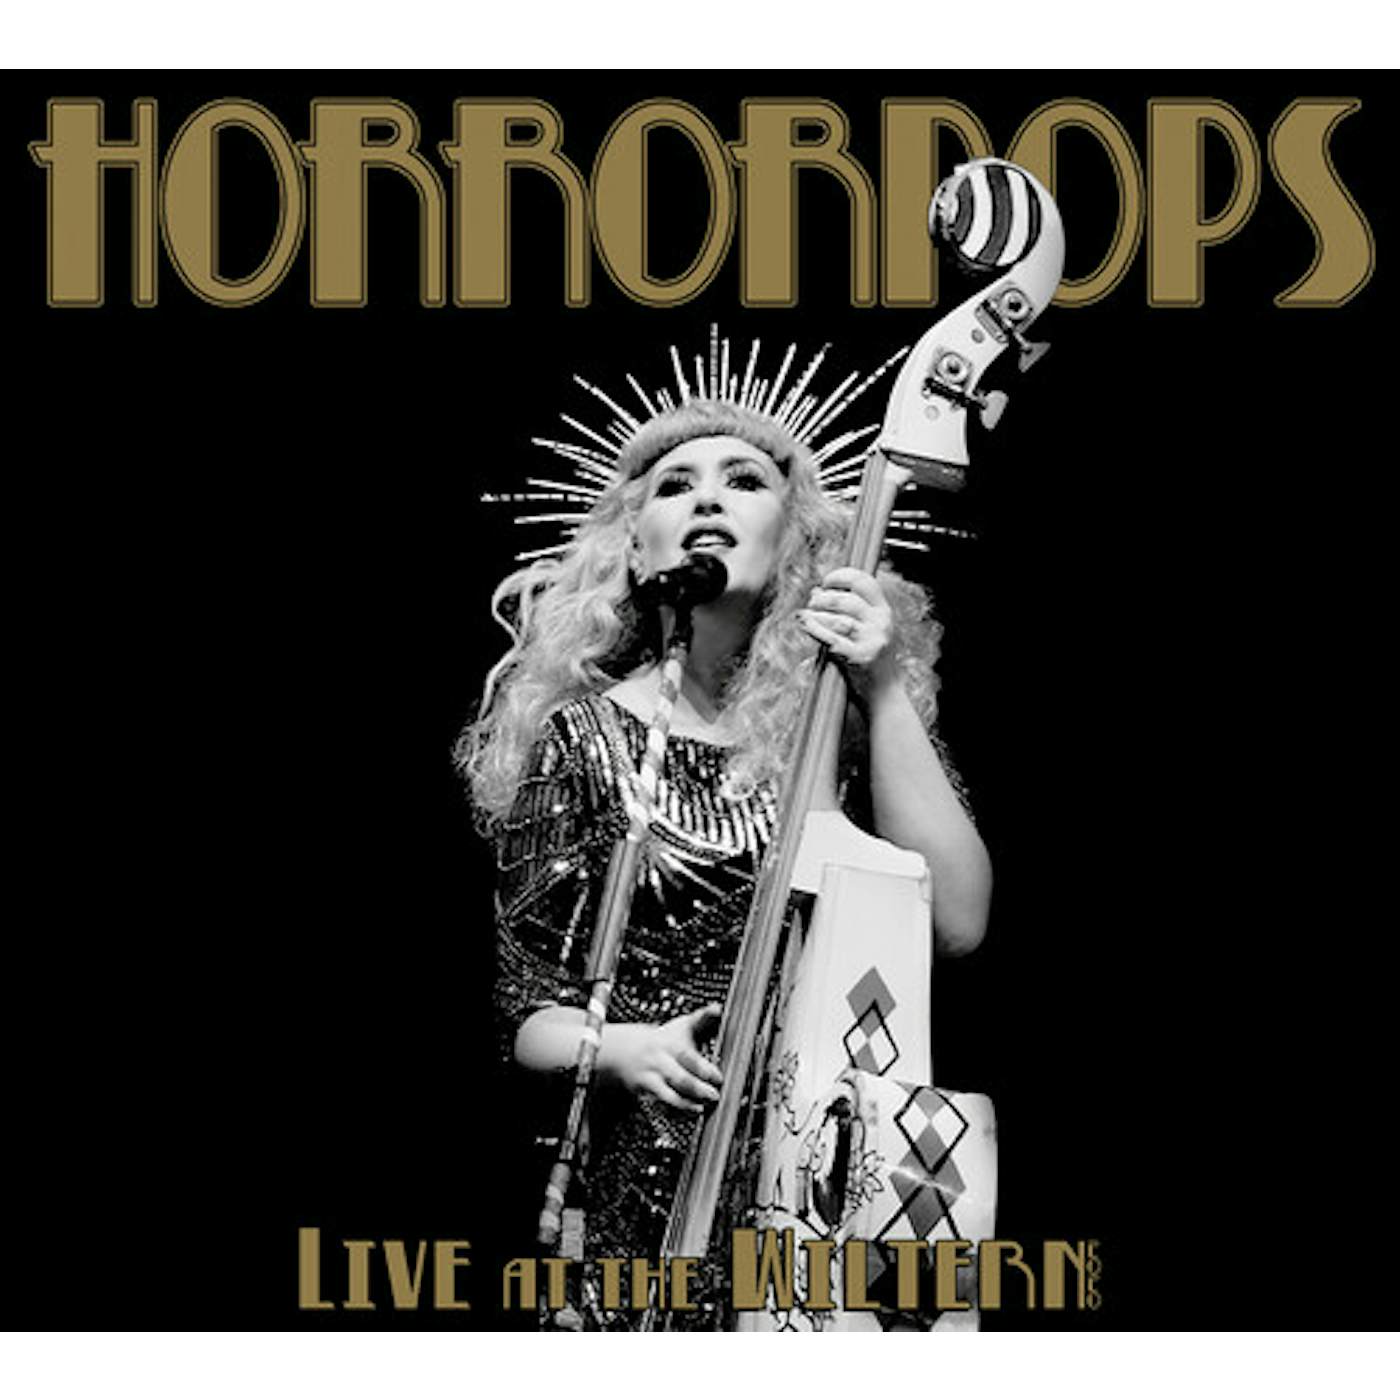 Horrorpops LIVE AT THE WILTERN Blu-ray